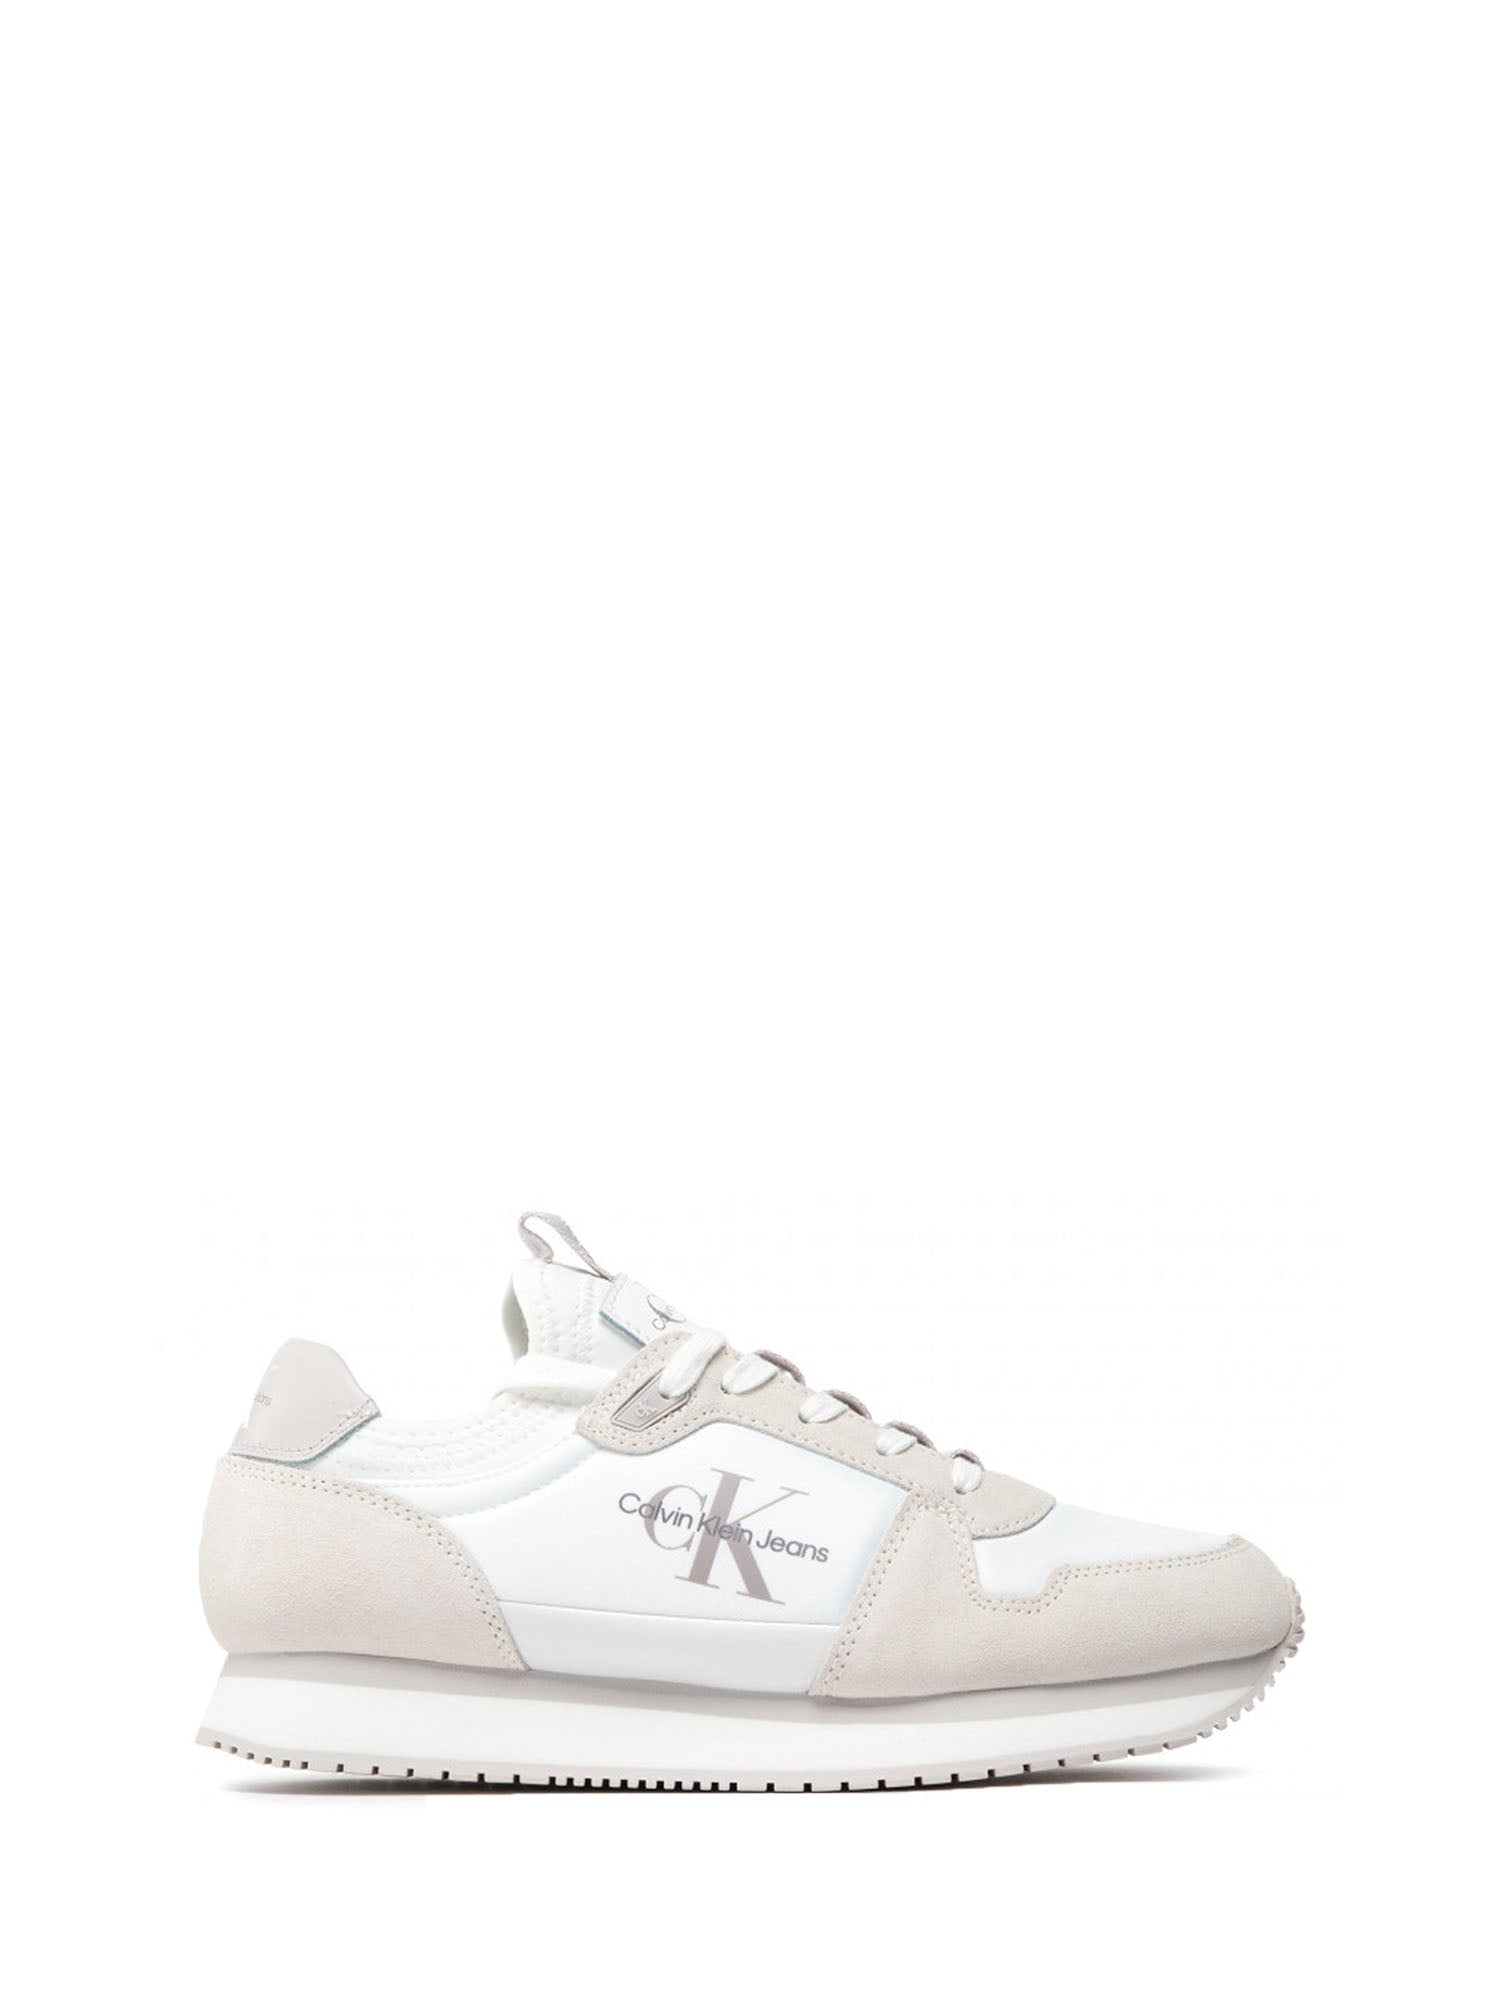 CALVIN KLEIN SHOES SNEAKERS RUNNER SOCK LACEUP NY-LTH BIANCO